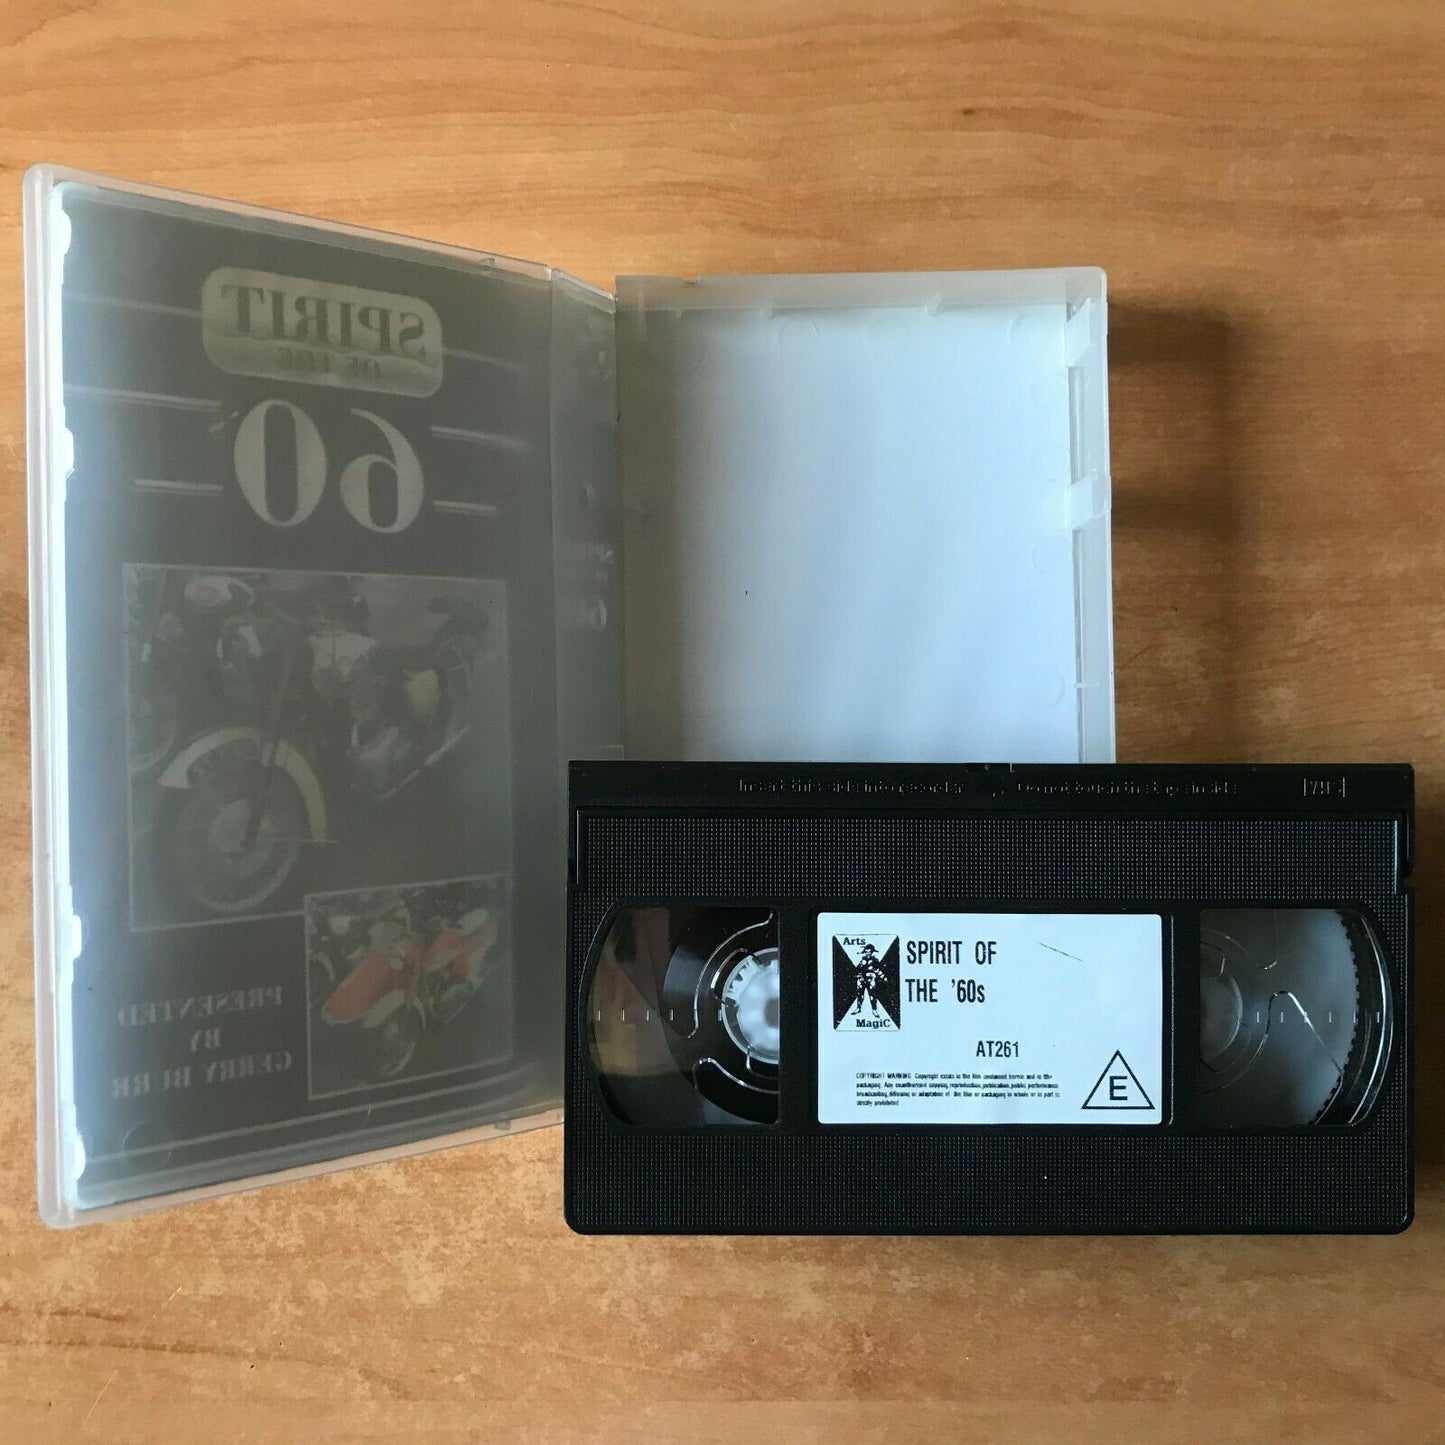 Spirit Of The 60's; [Gerry Burr]: Britains Classic Motorcycle Run - Pal VHS-